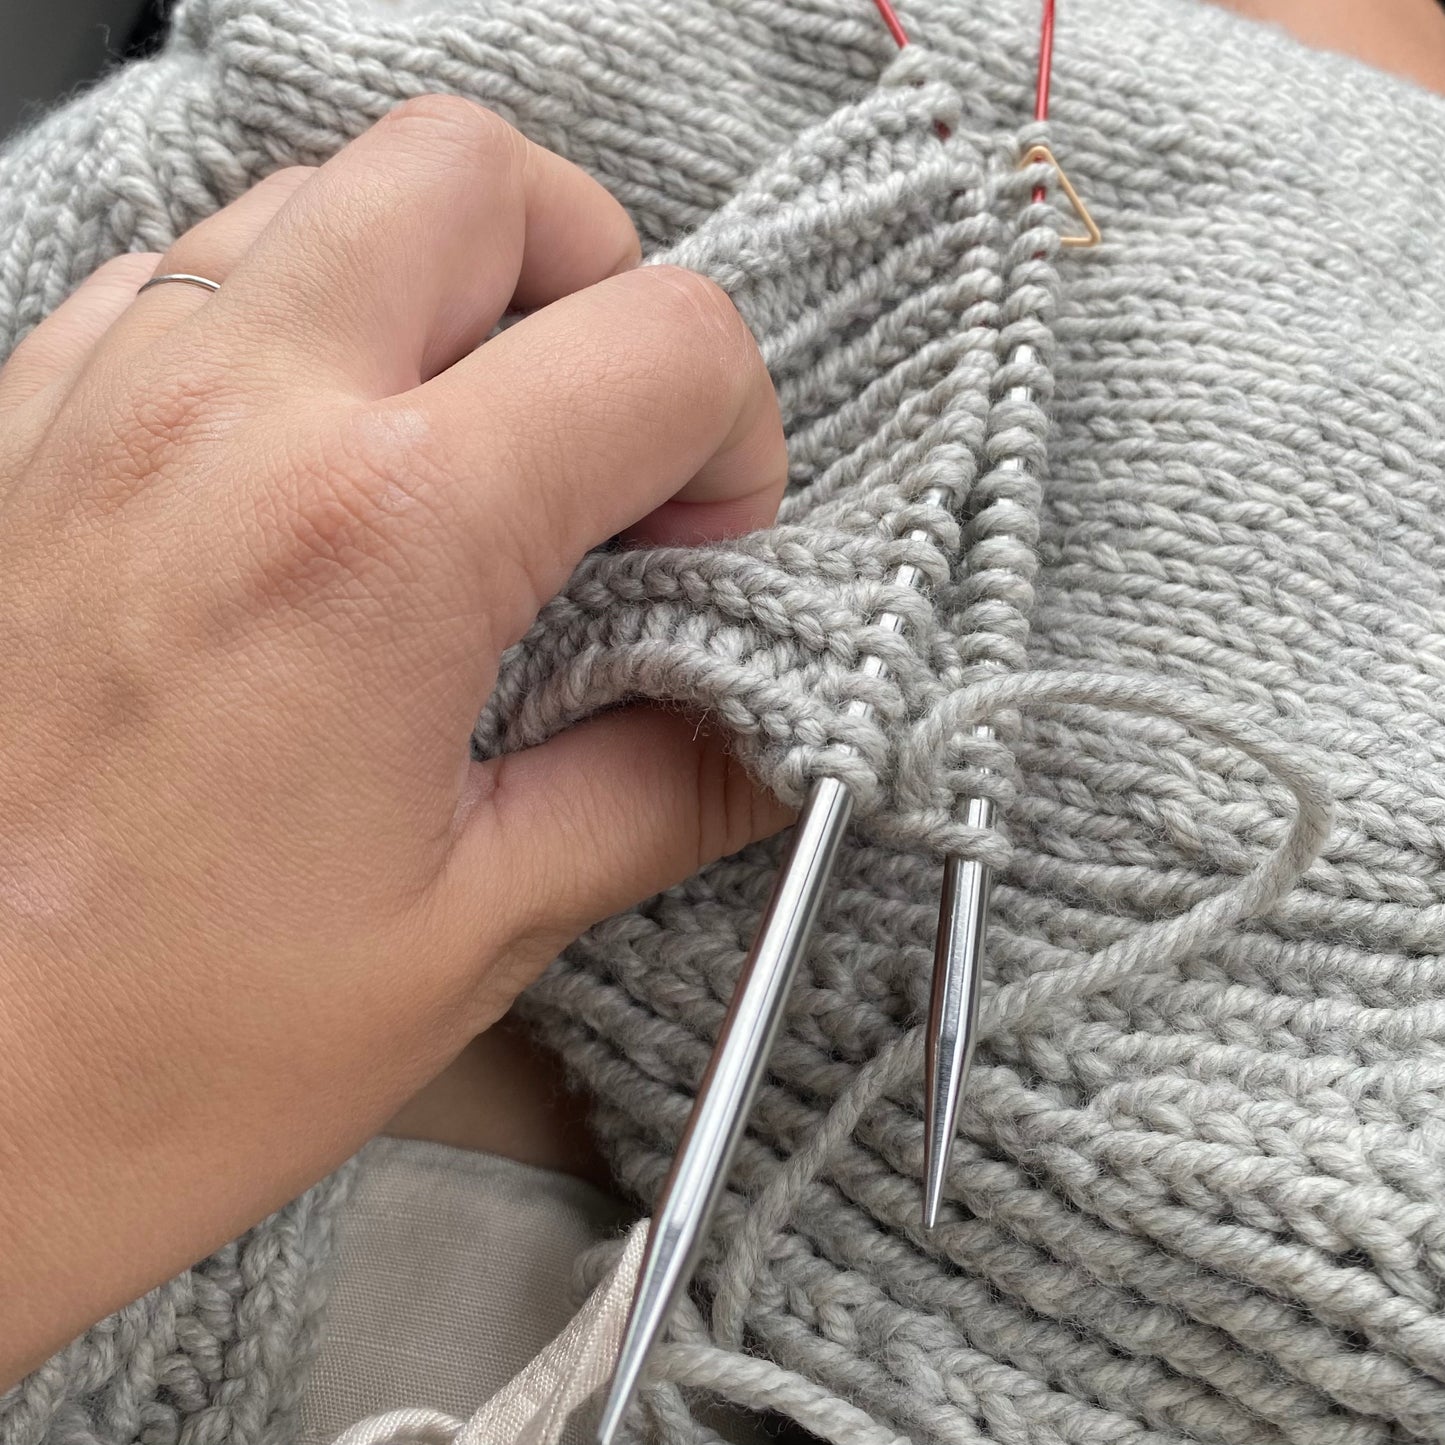 Knitting course - Free project